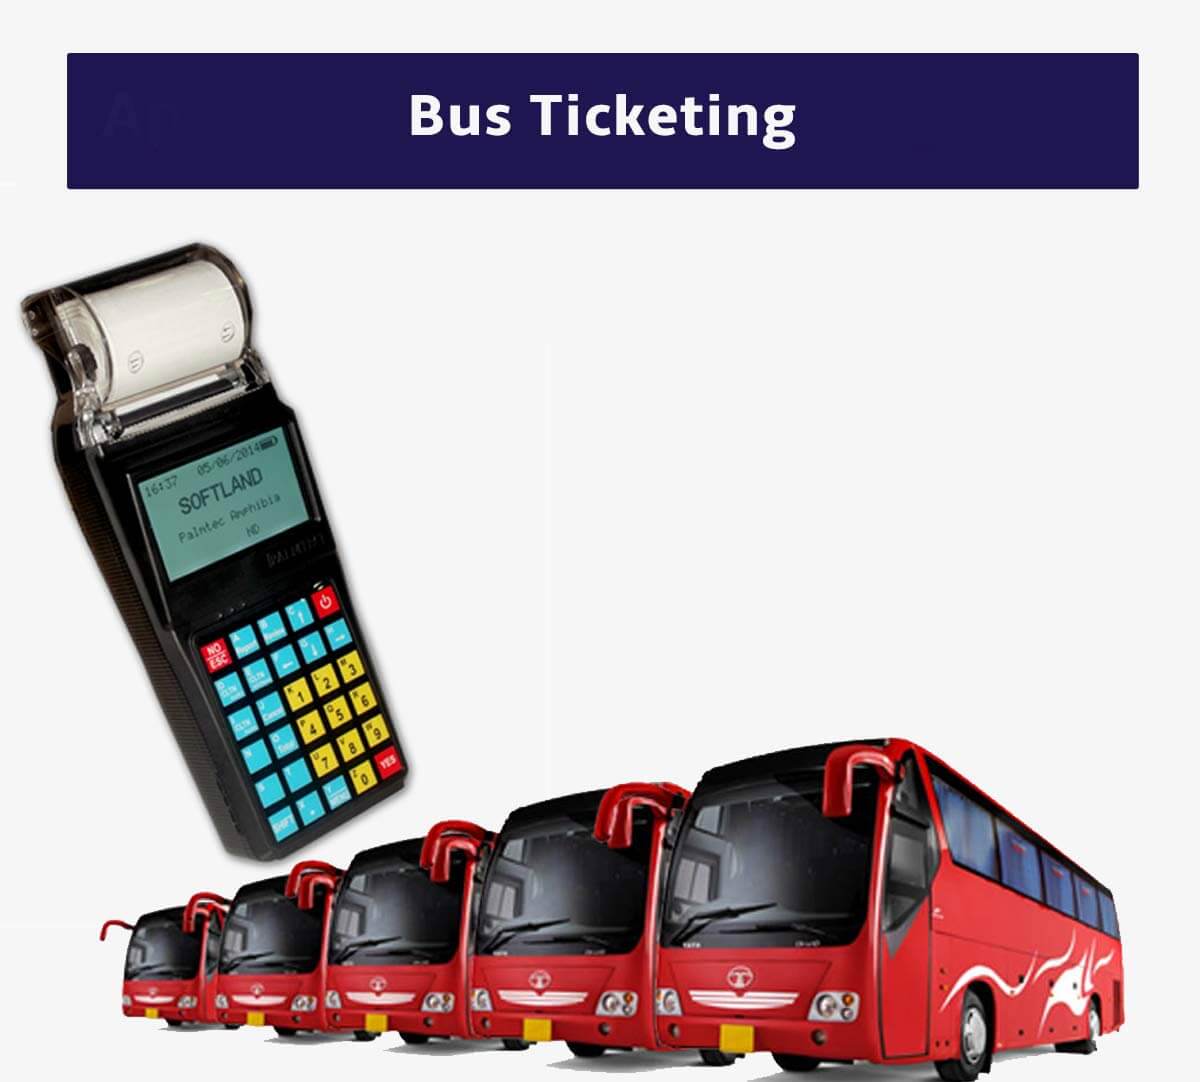 bus ticketing ticket system machine payment handheld buses receipt card govt corporation transport india printer device